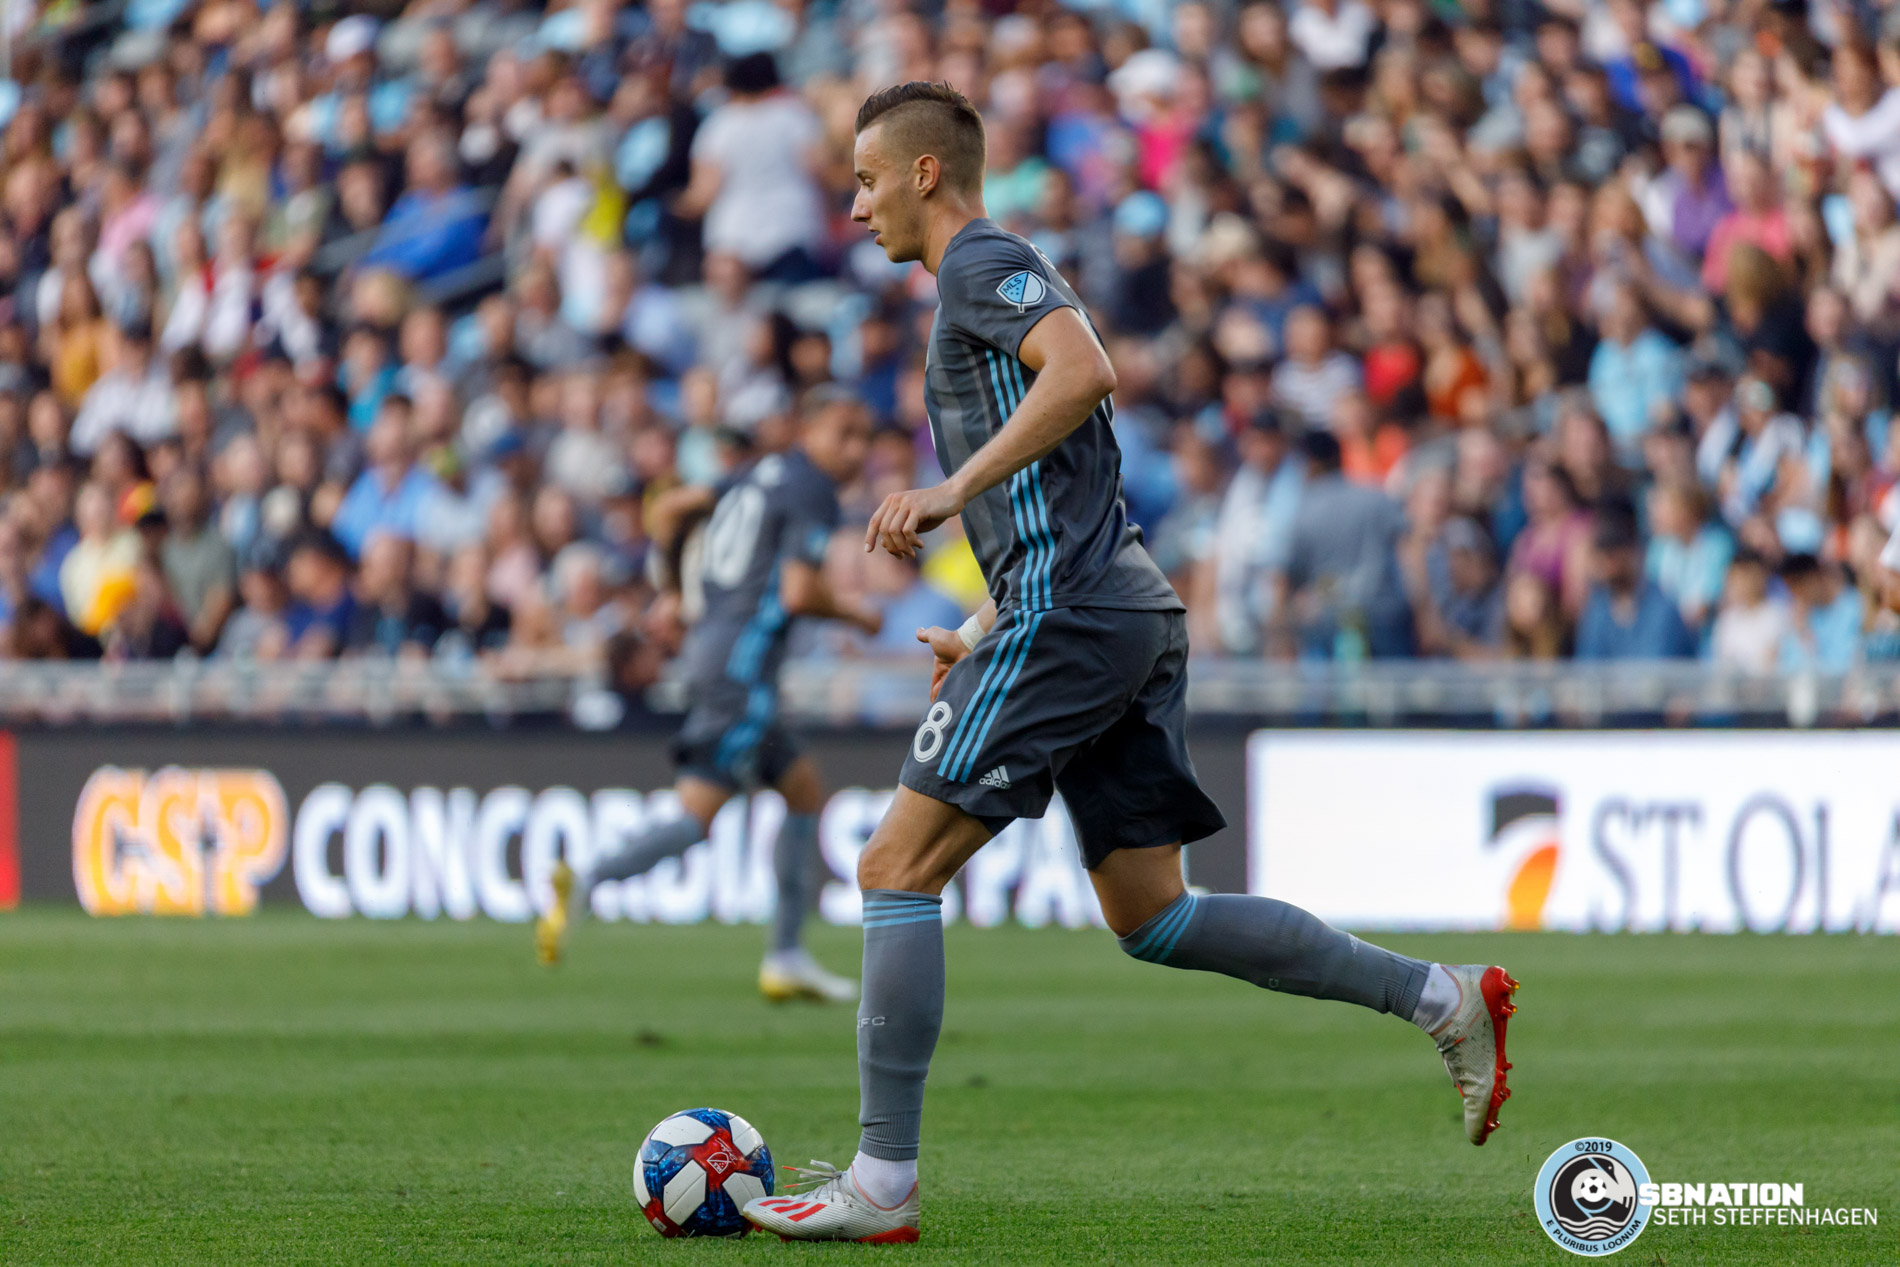 July 10, 2019 - Saint Paul, Minnesota, United States - Minnesota United midfielder Ján Greguš (8) dribbles the ball during the quarter-final match of the US Open Cup between Minnesota United and New Mexico United at Allianz Field. 